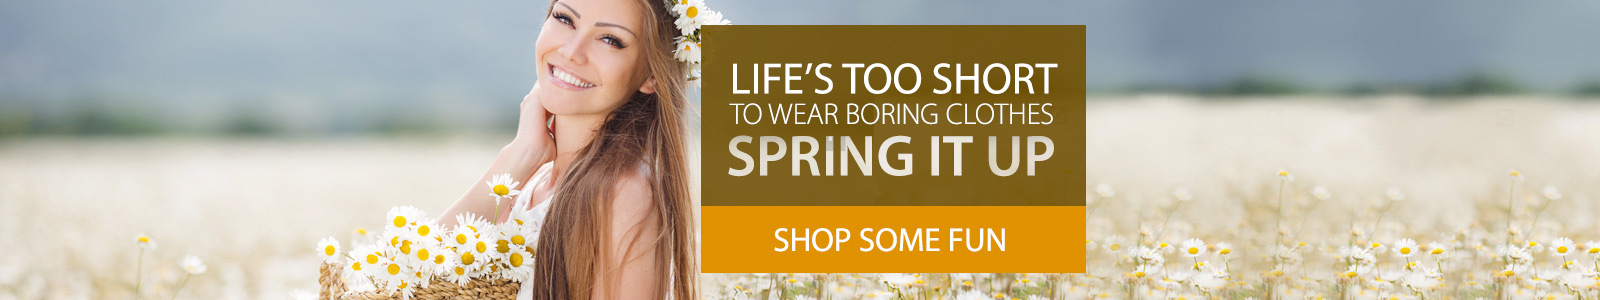 Life's too short to wear borning clothes spring it up